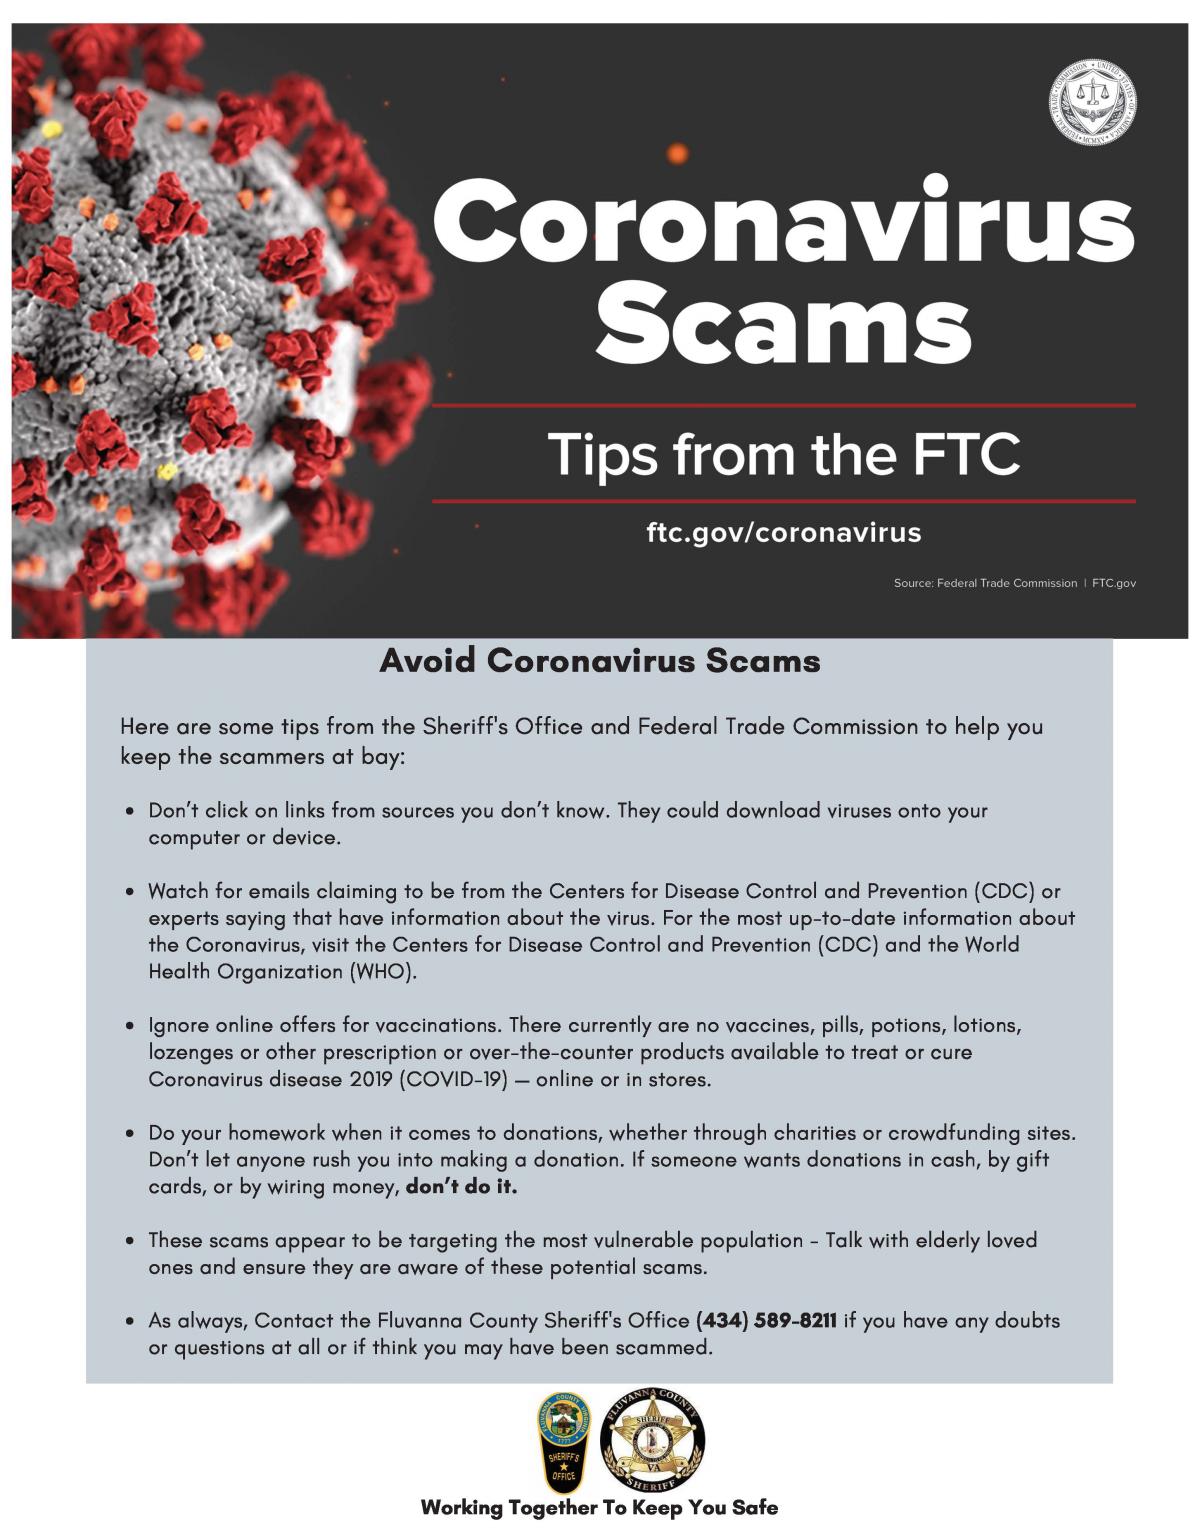 image of virus cell and text advising awareness of potential scams